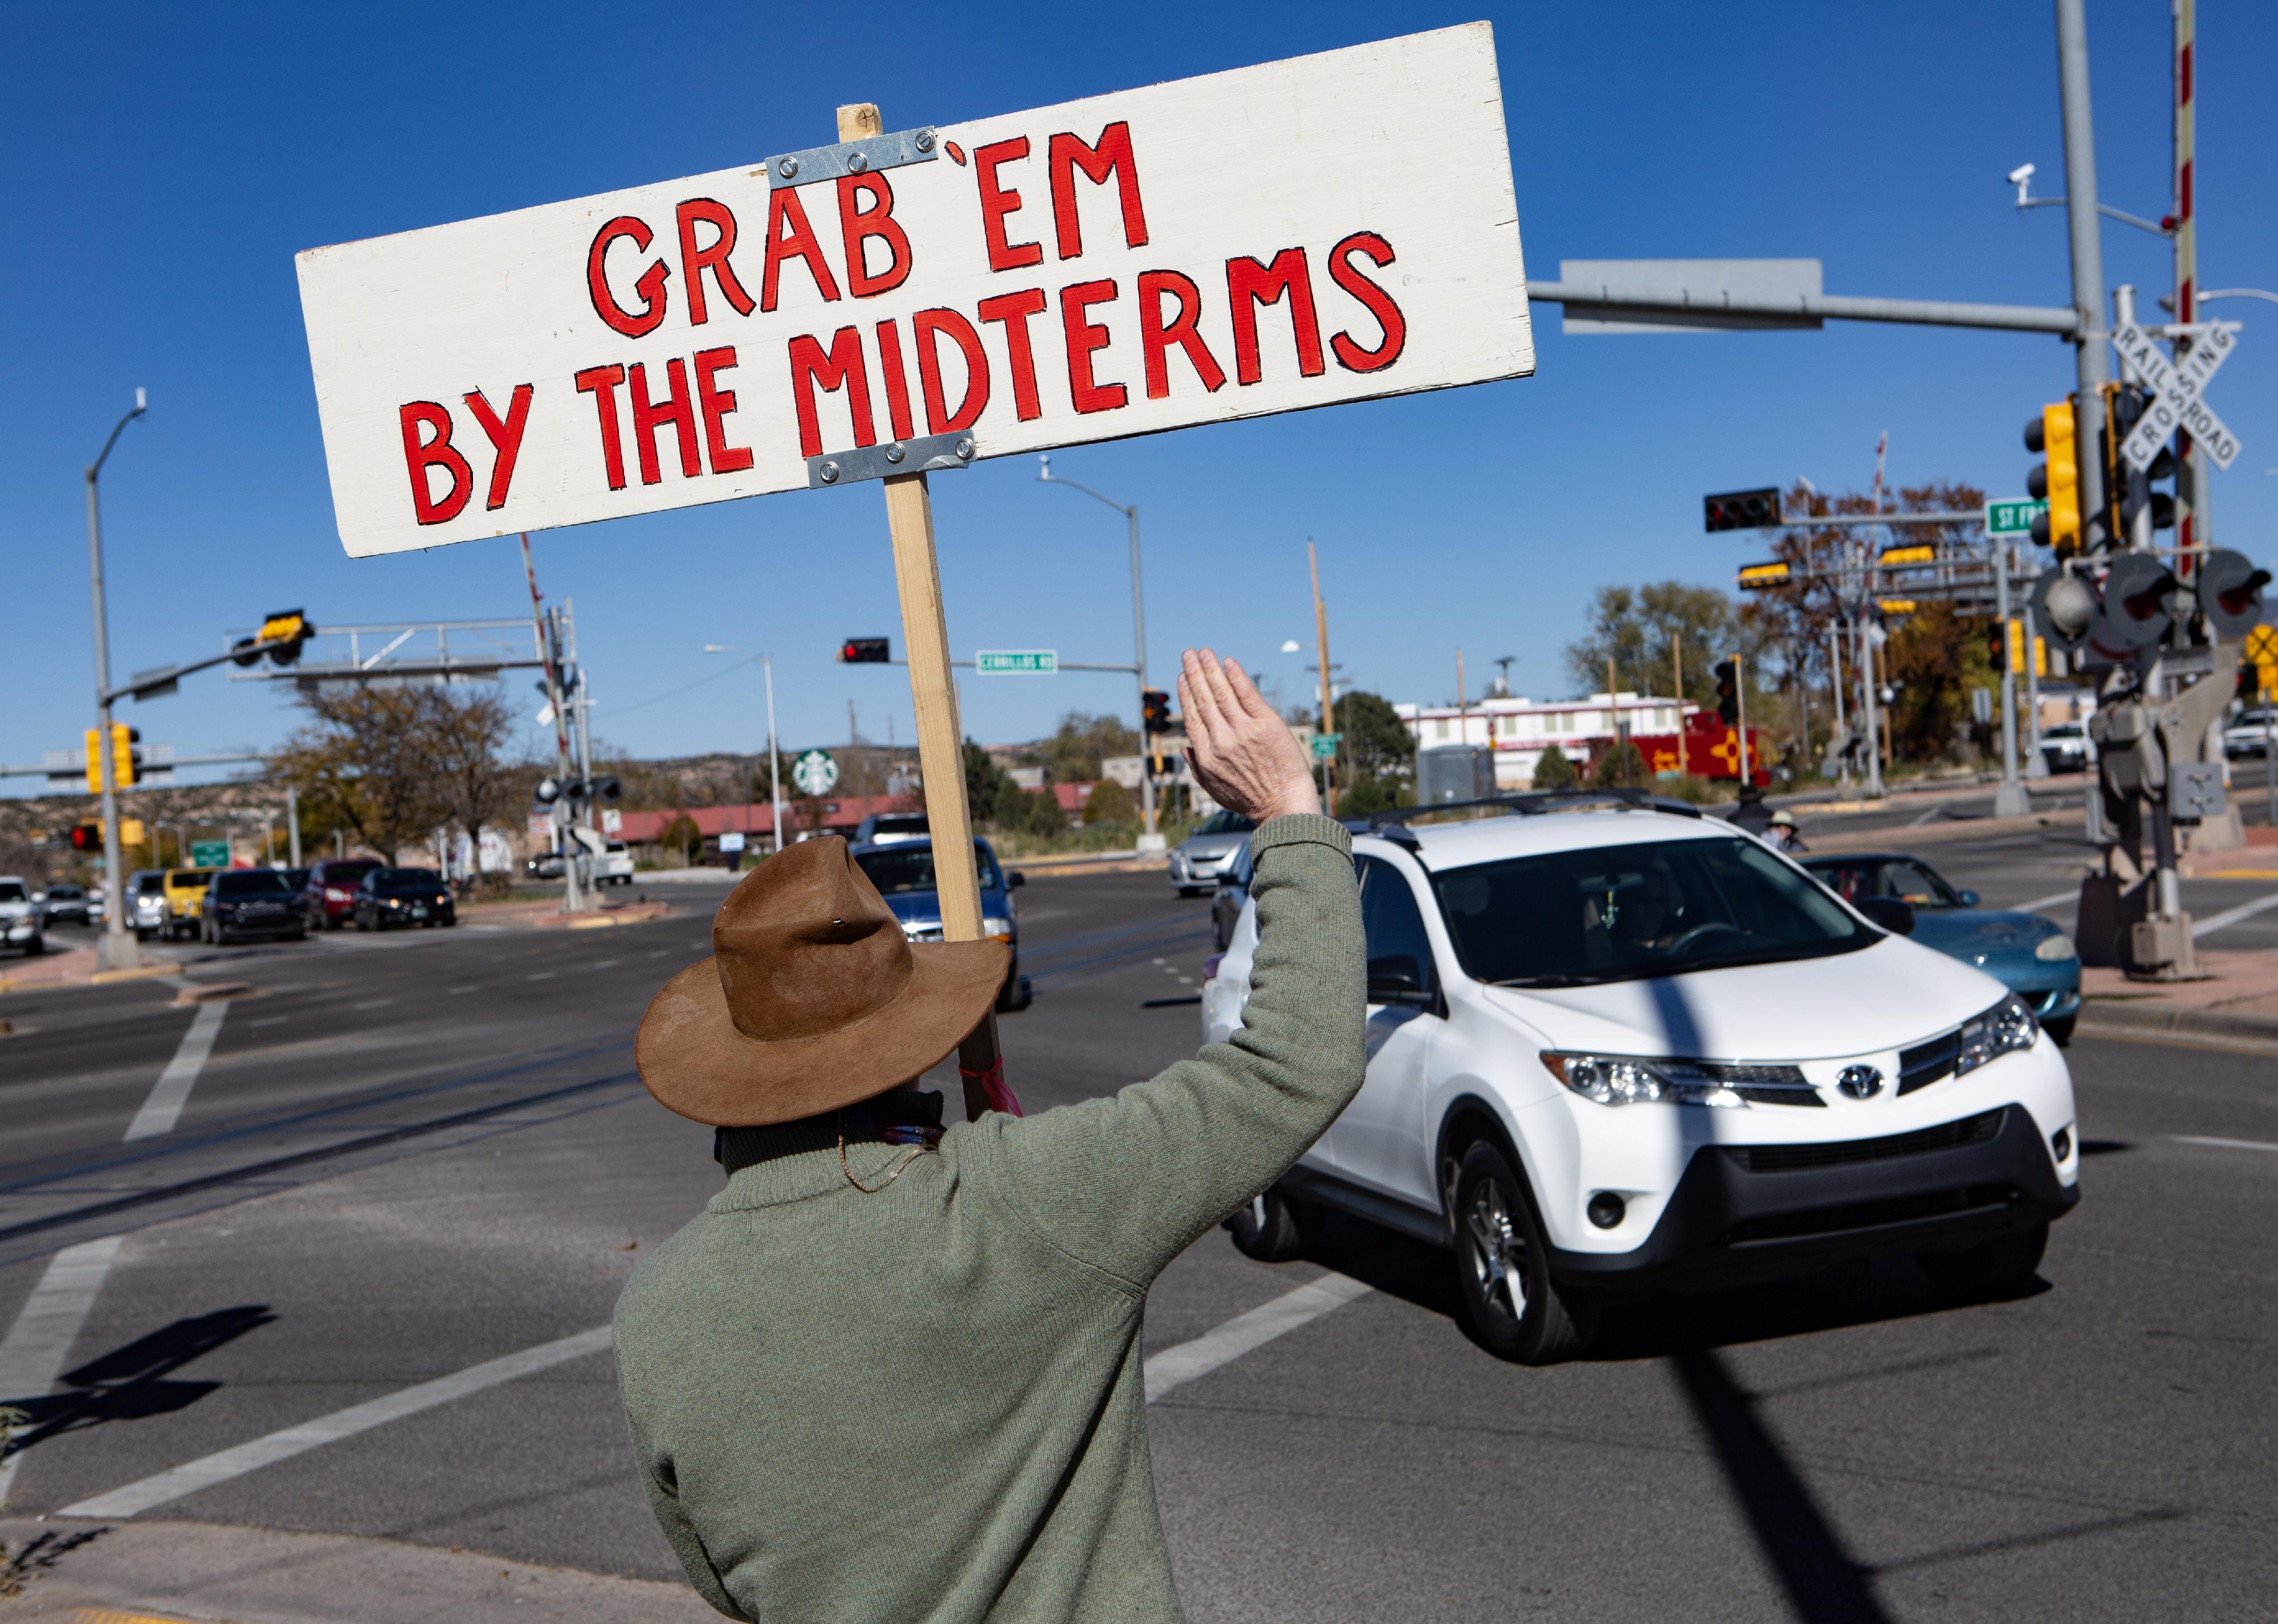 Activists at a intersection in Santa Fe, New Mexico, call on people to vote in the mid-term elections